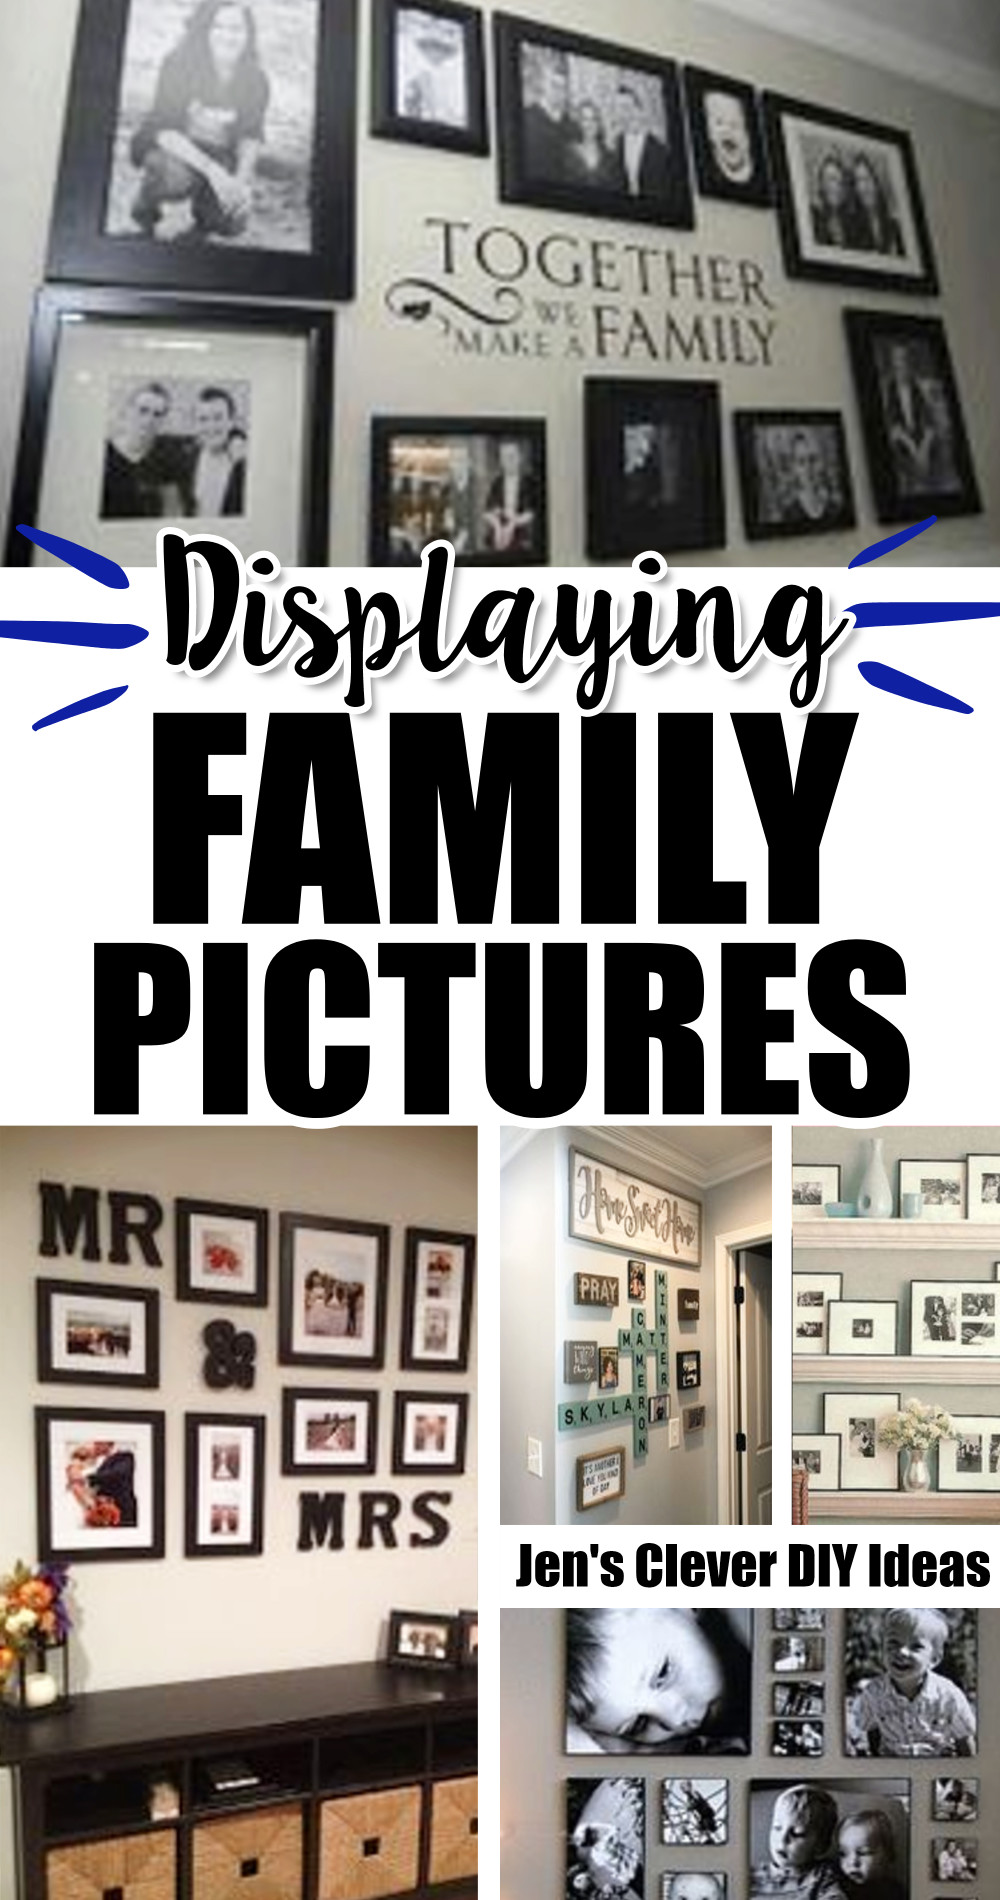 Displaying Family Pictures